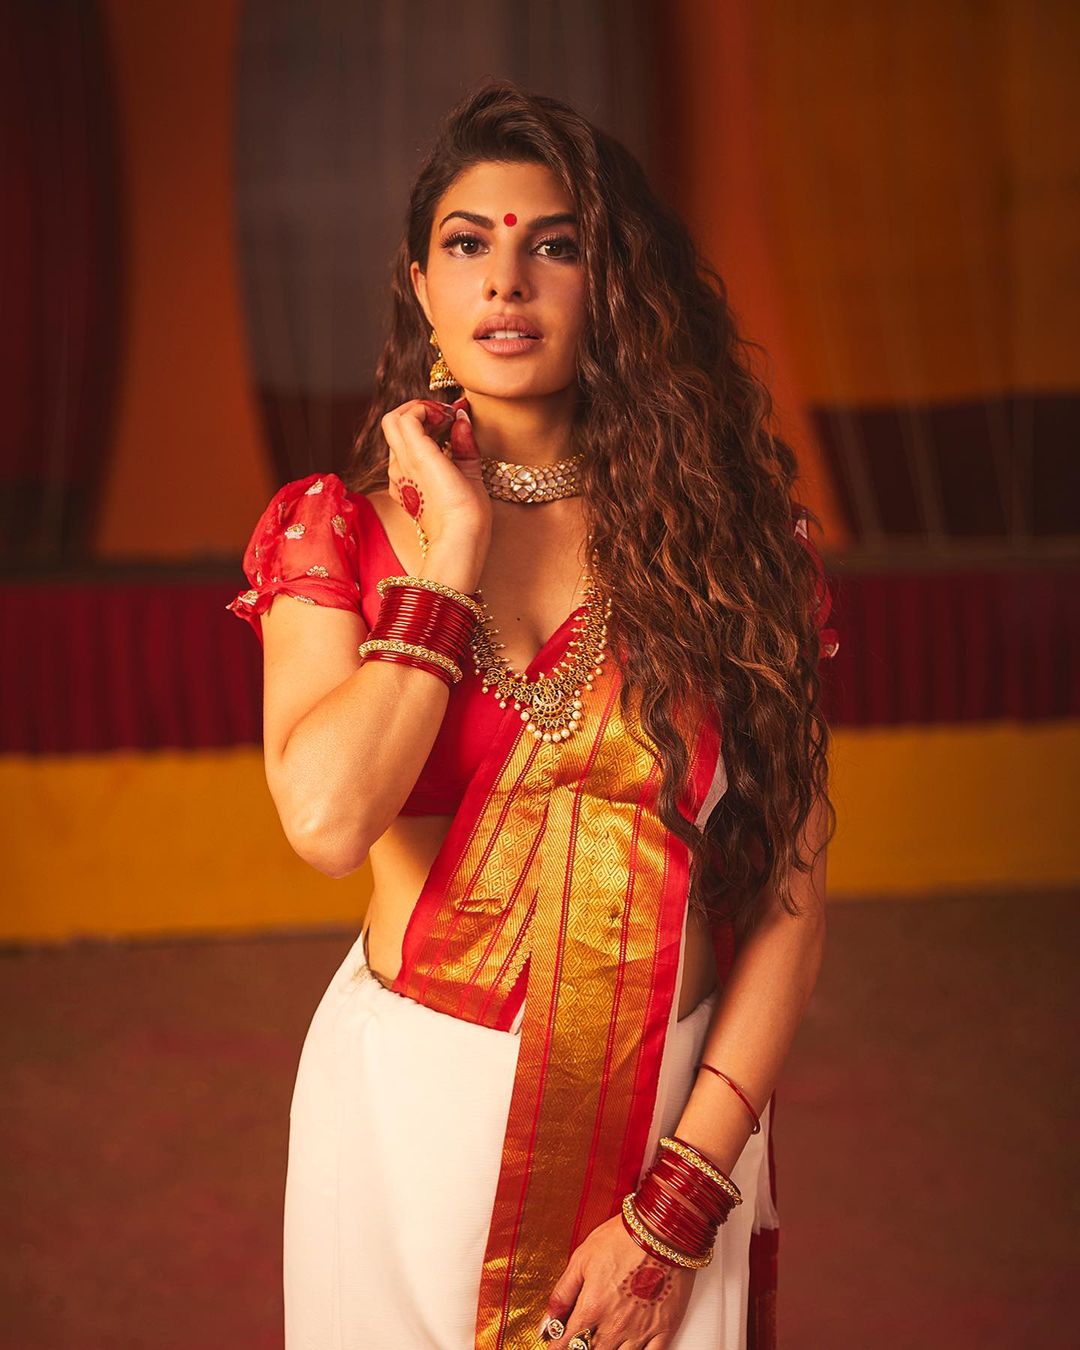 Jacqueline Fernandez turns up the heat in the white and red saree.